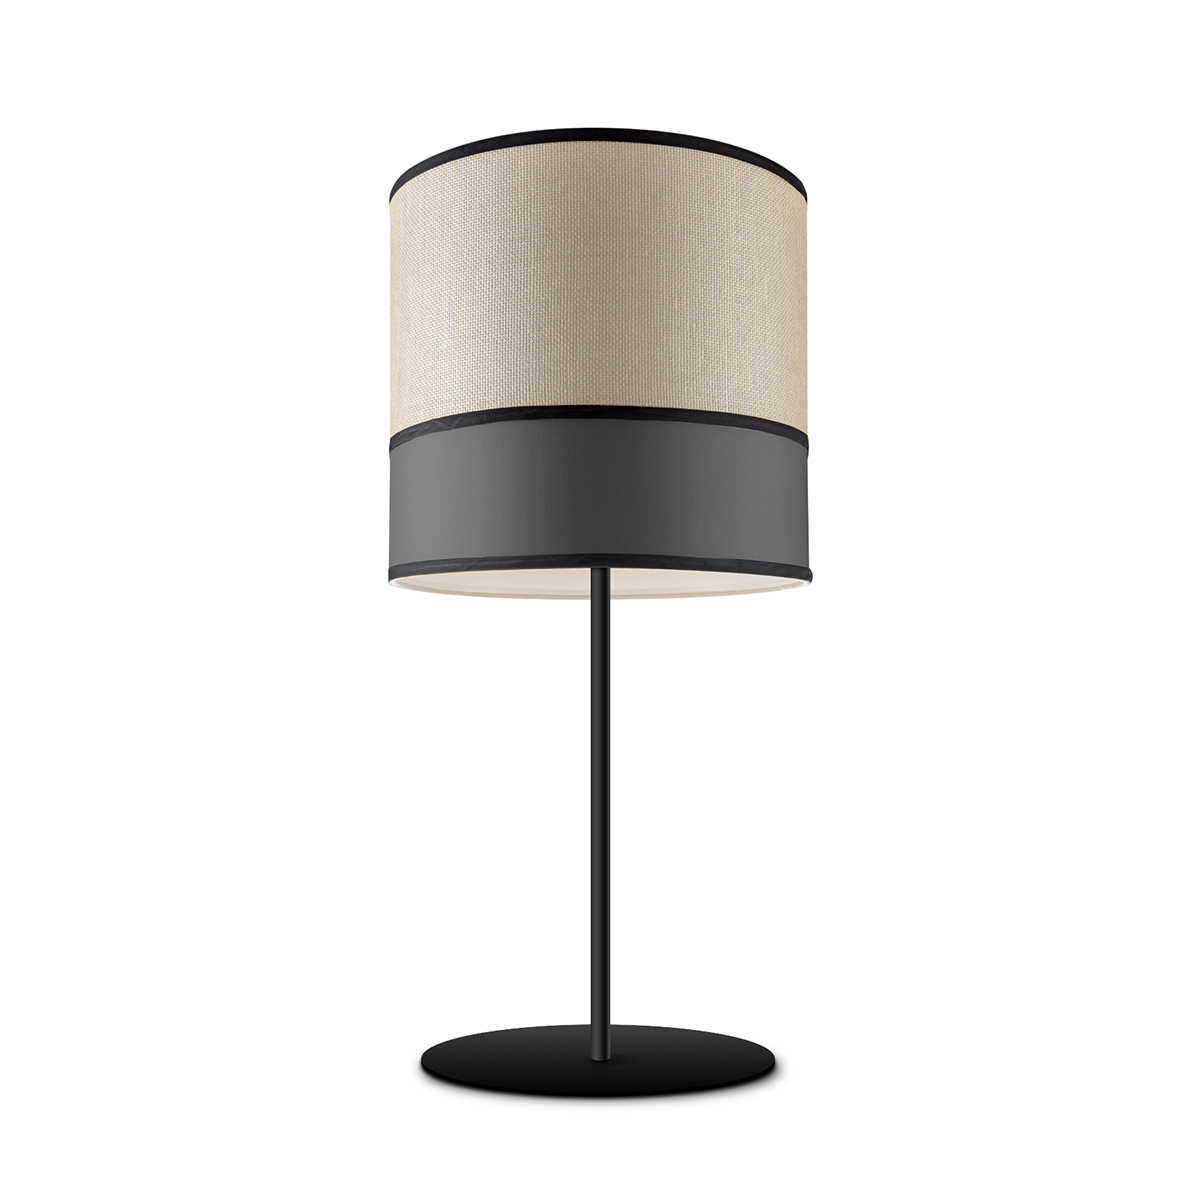 Tangla lighting - TLT7041-25GY - LED table lamp 1 Light - metal and paper and TC fabric in grey - bright - E27